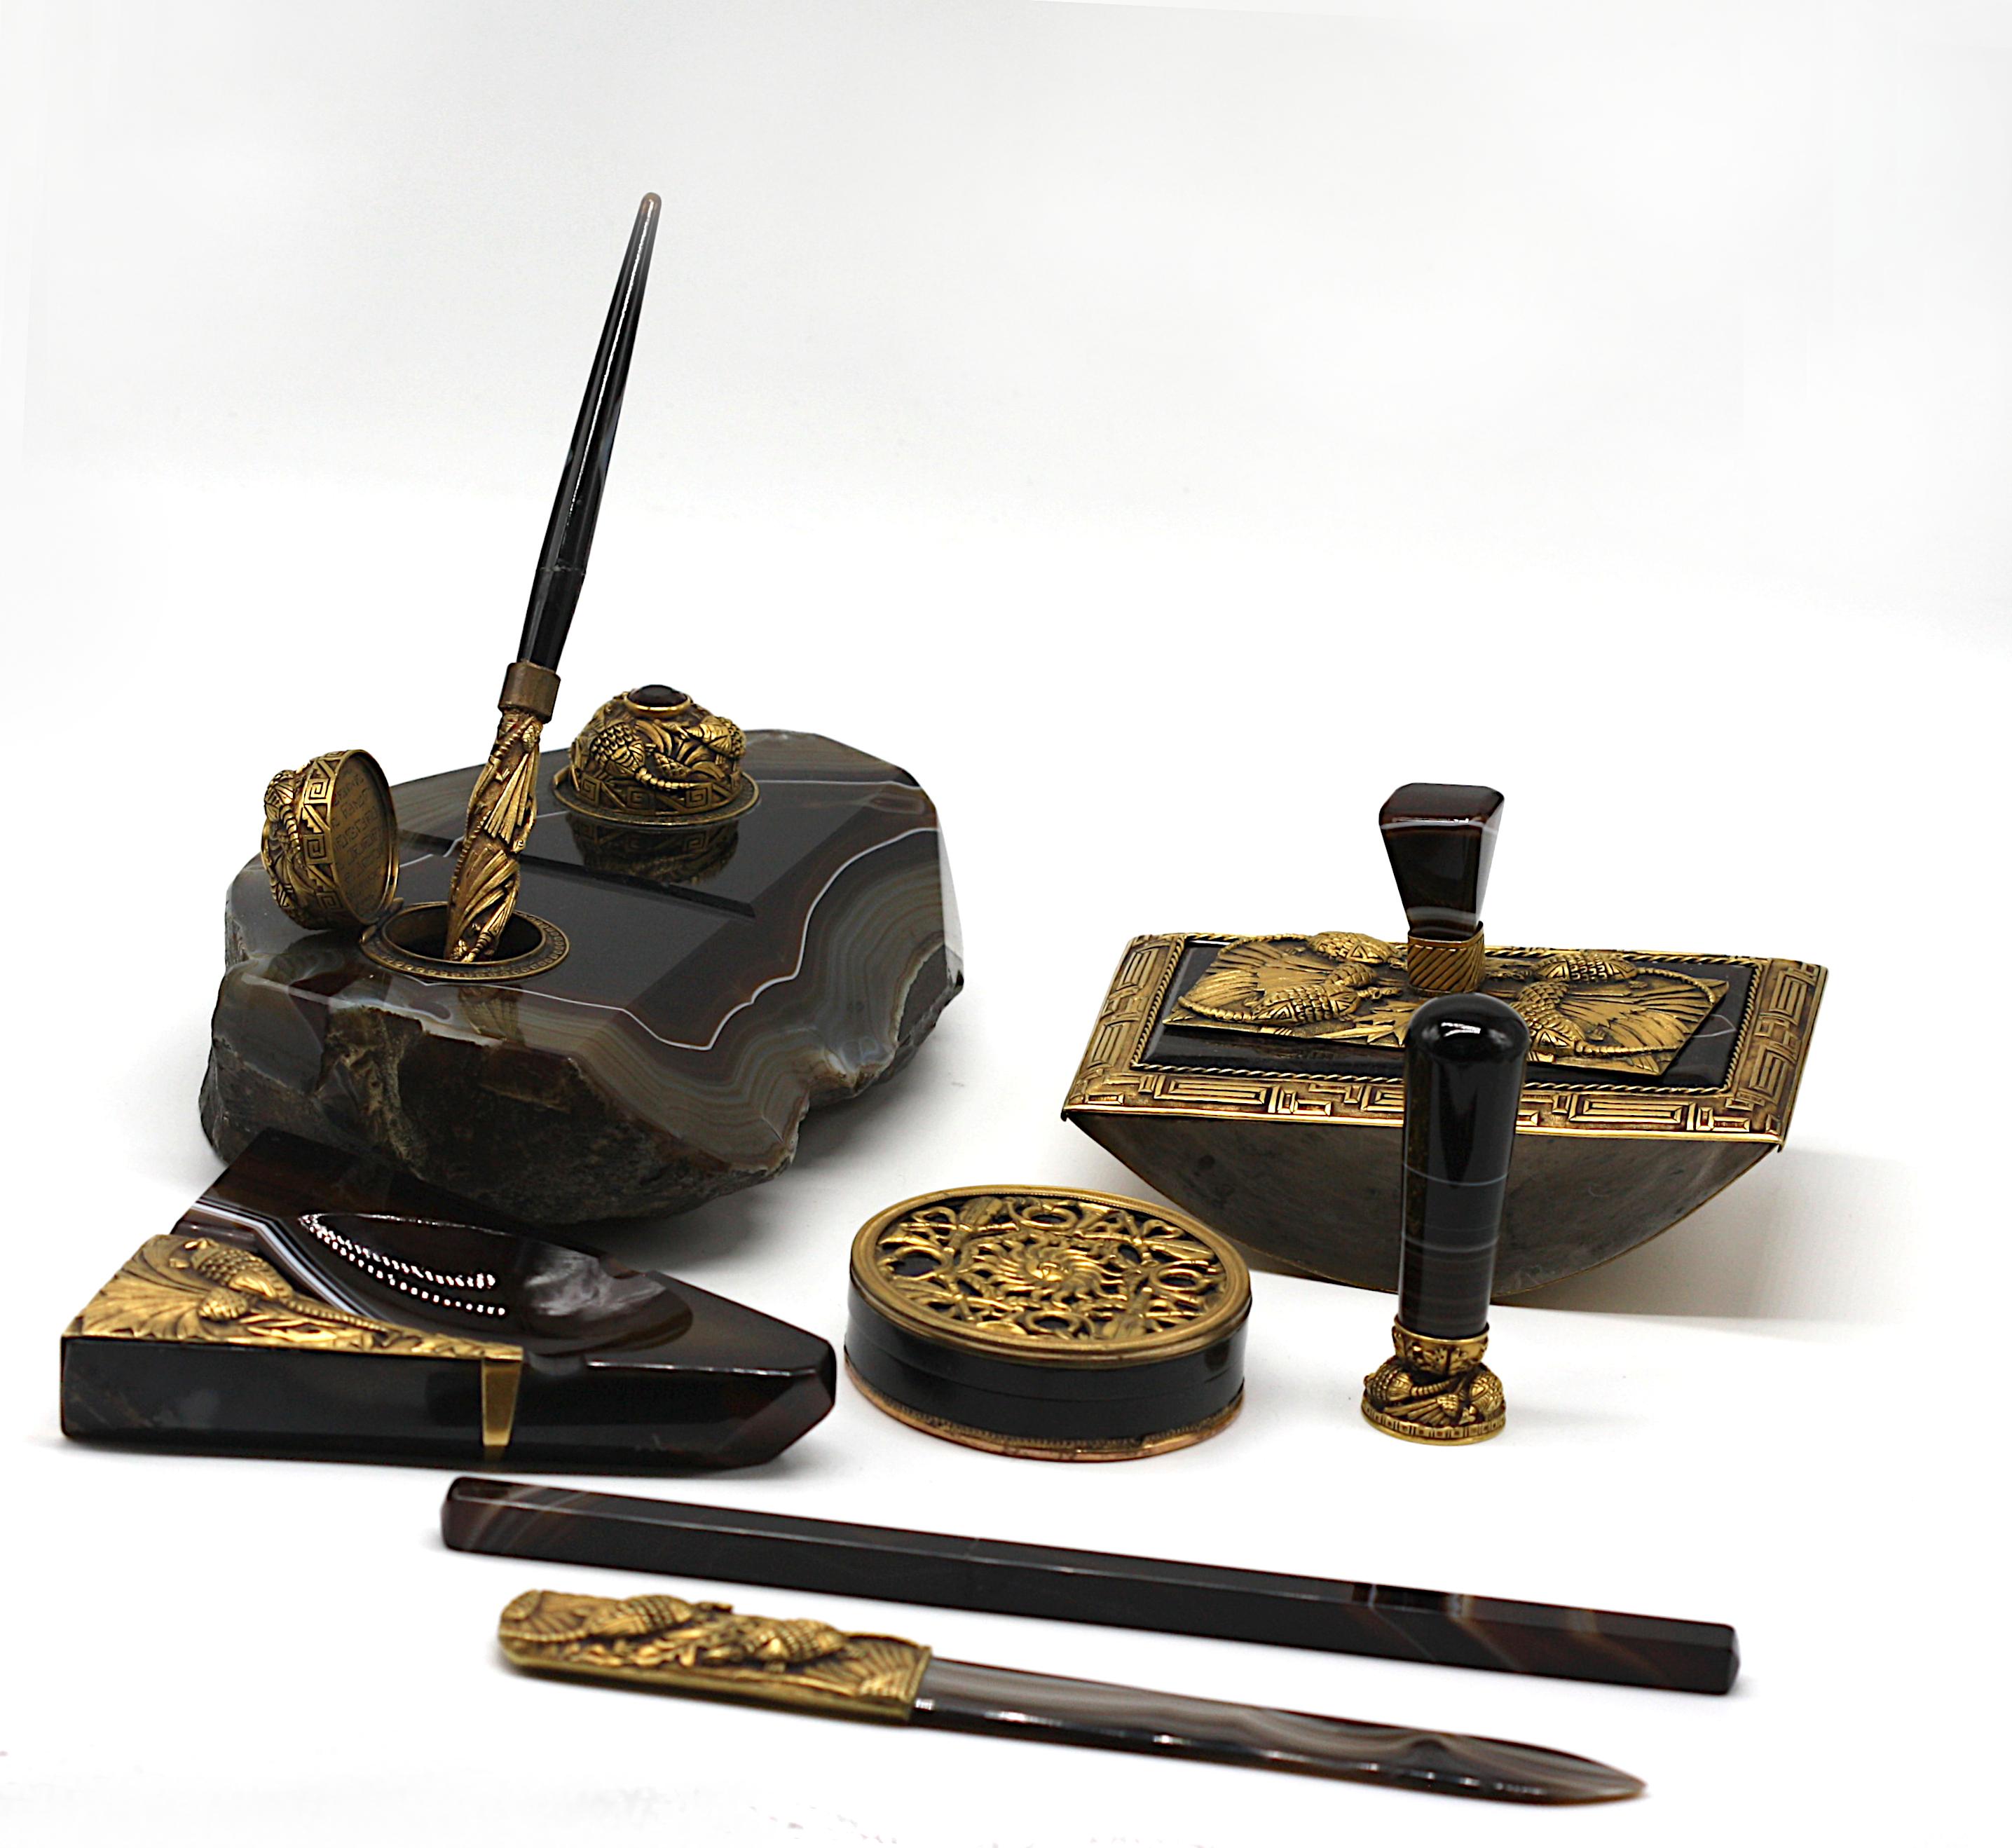 A nine-piece gilt-metal and stone-inlaid assembled desk set
20th century
comprising an inkwell, a pen holder, a stamp box, a pen, a hand blotter, a what not tray, monogramed stamp, letter opener and a silvered box stamped
redmile LONDON